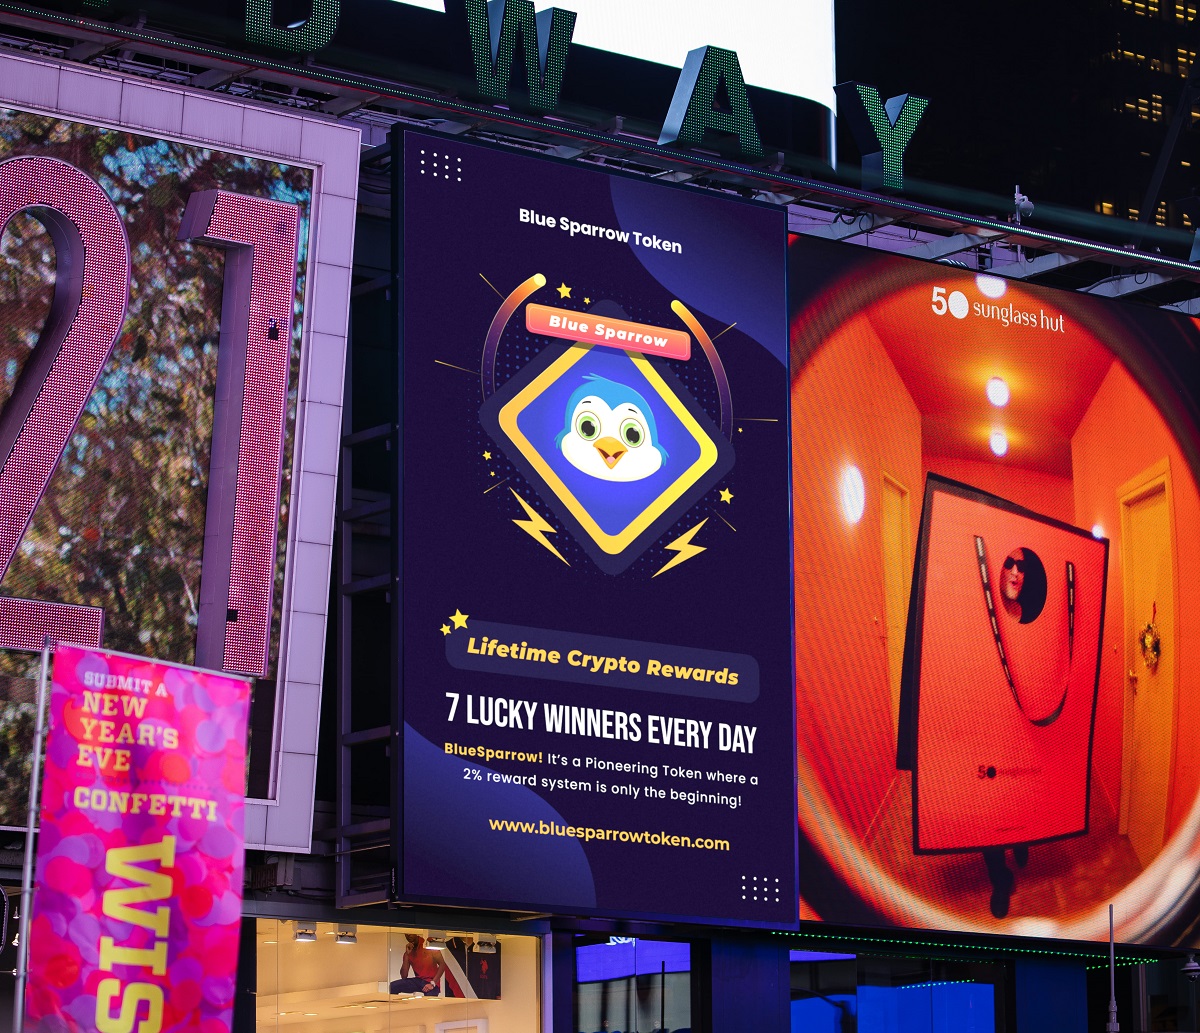 The BlueSparrow Token Hits Times Square NYC